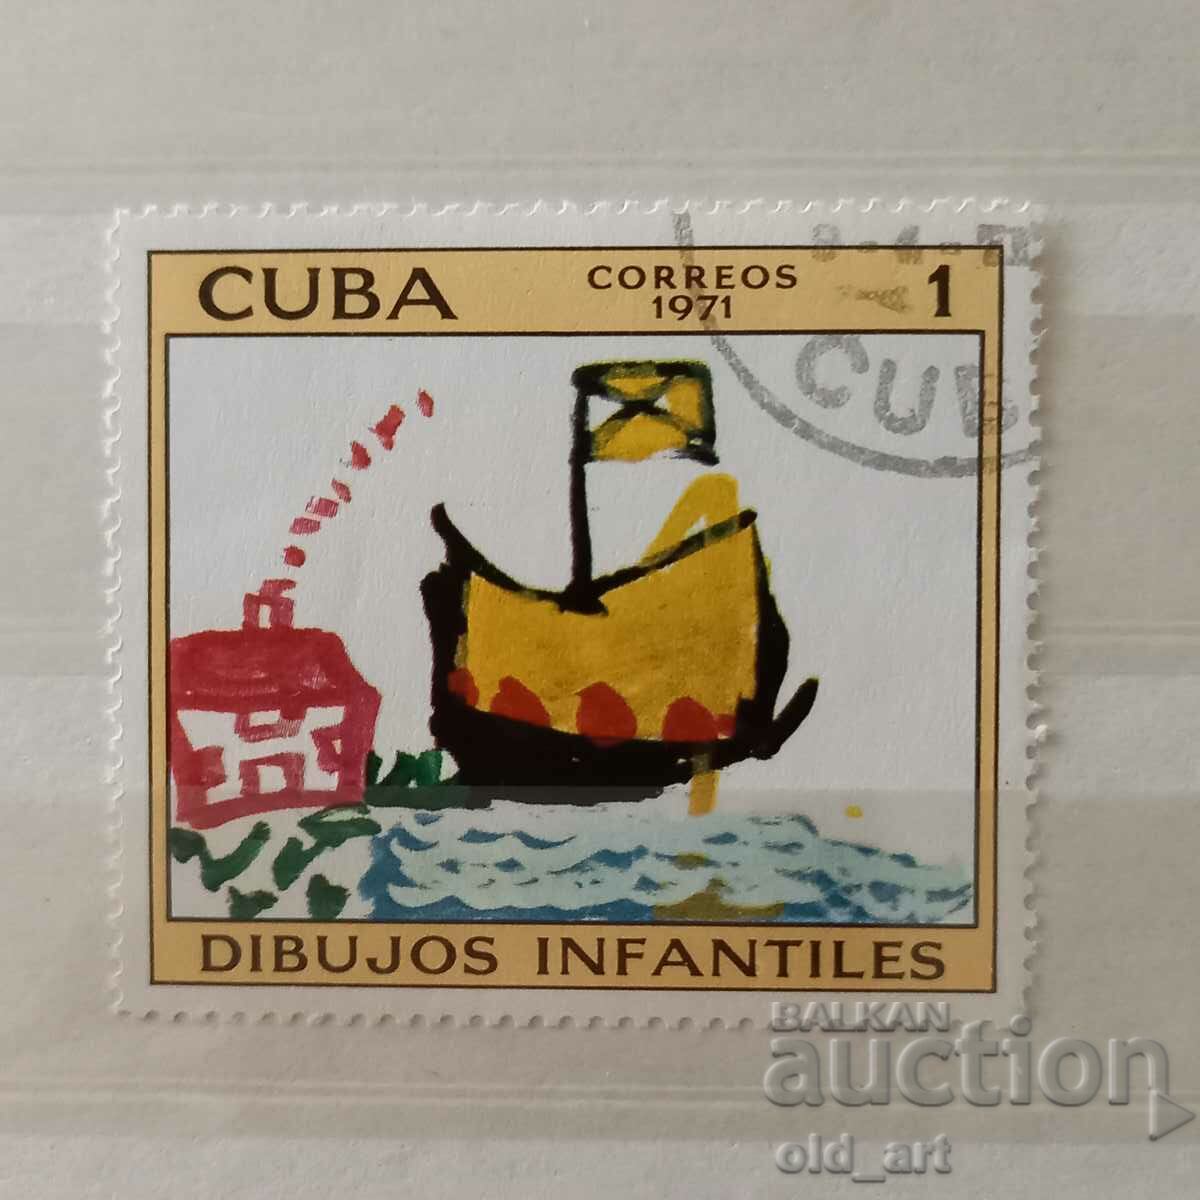 Postage stamp - Cuba, Children, Drawings